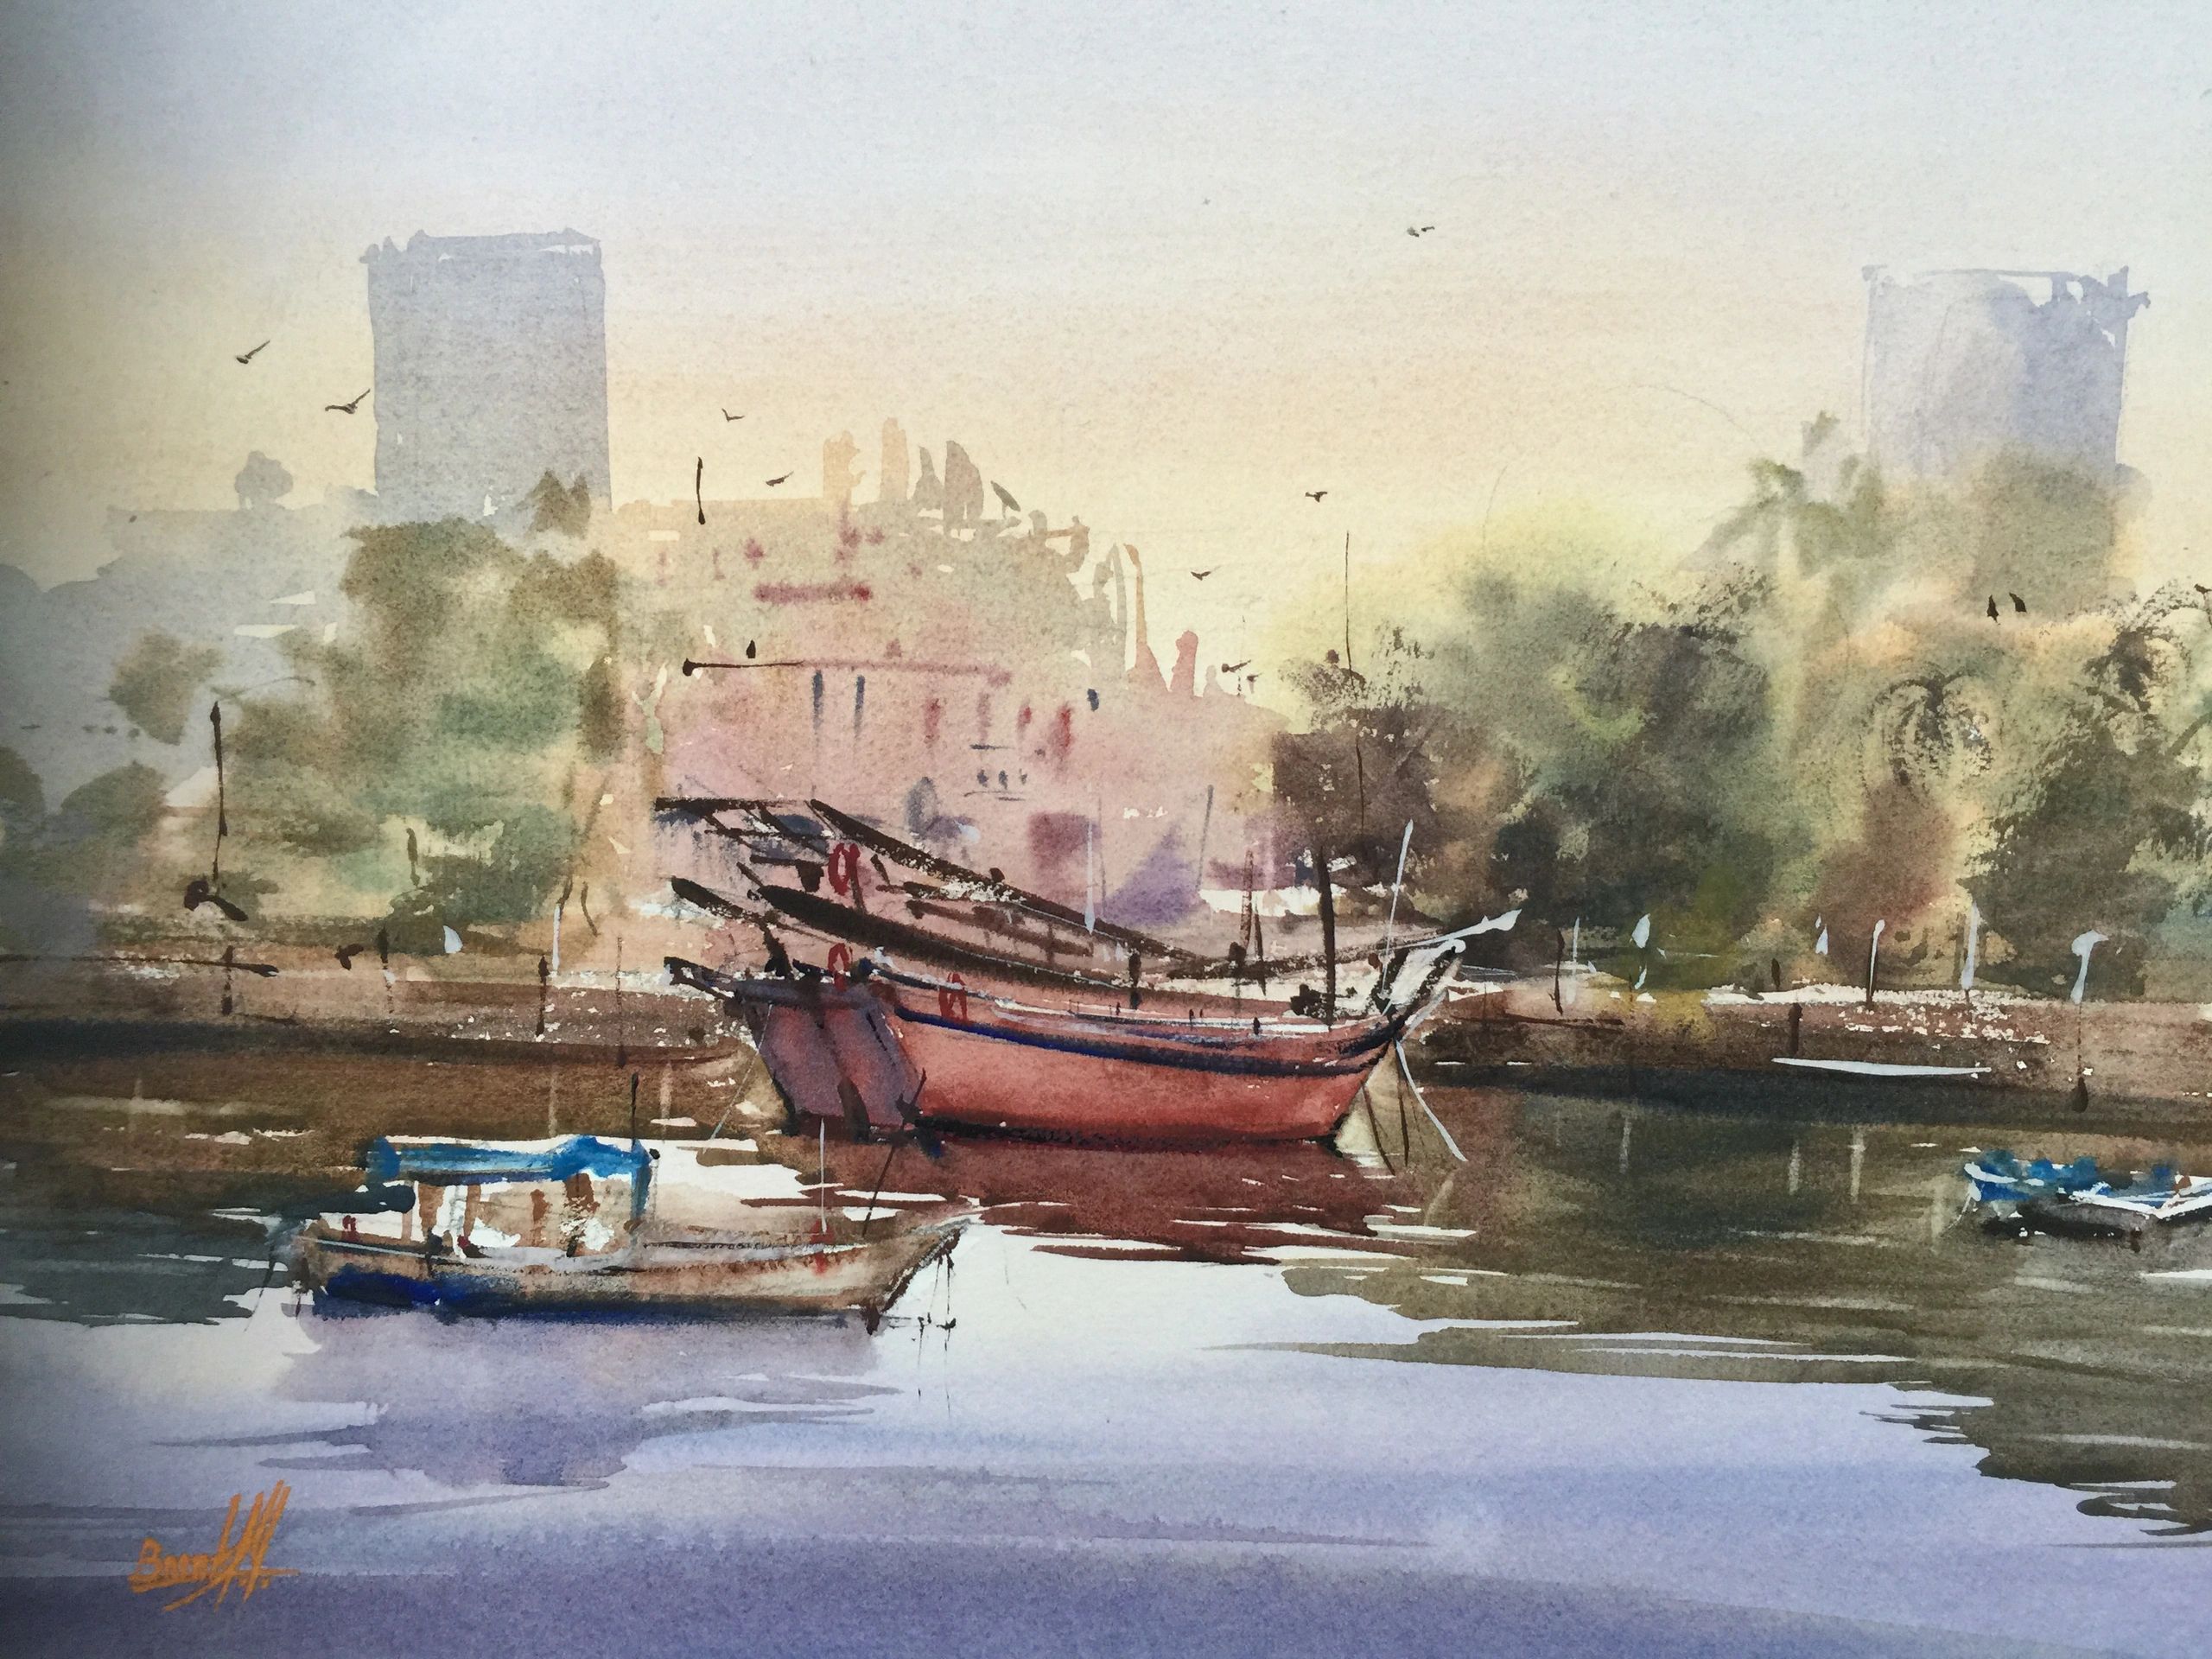 Ajman waterfront
30 cm x 40 cm
Watercolor on 300gsm Arches cold pressed paper. 
Plein air painting.